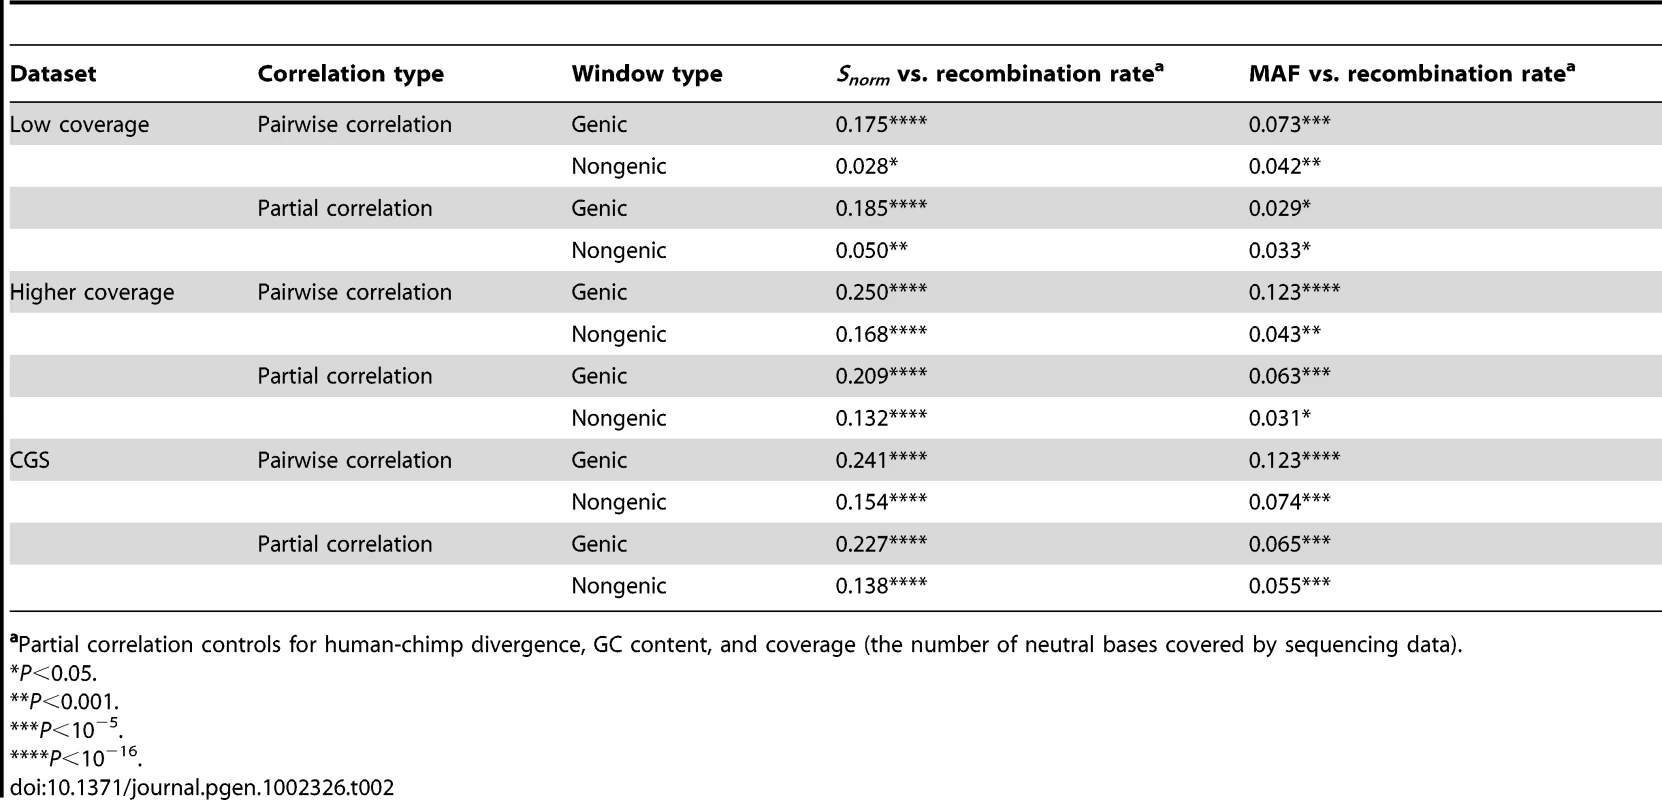 Summary of correlation coefficients (Spearman's ) for the three datasets divided into genic and non-genic windows.